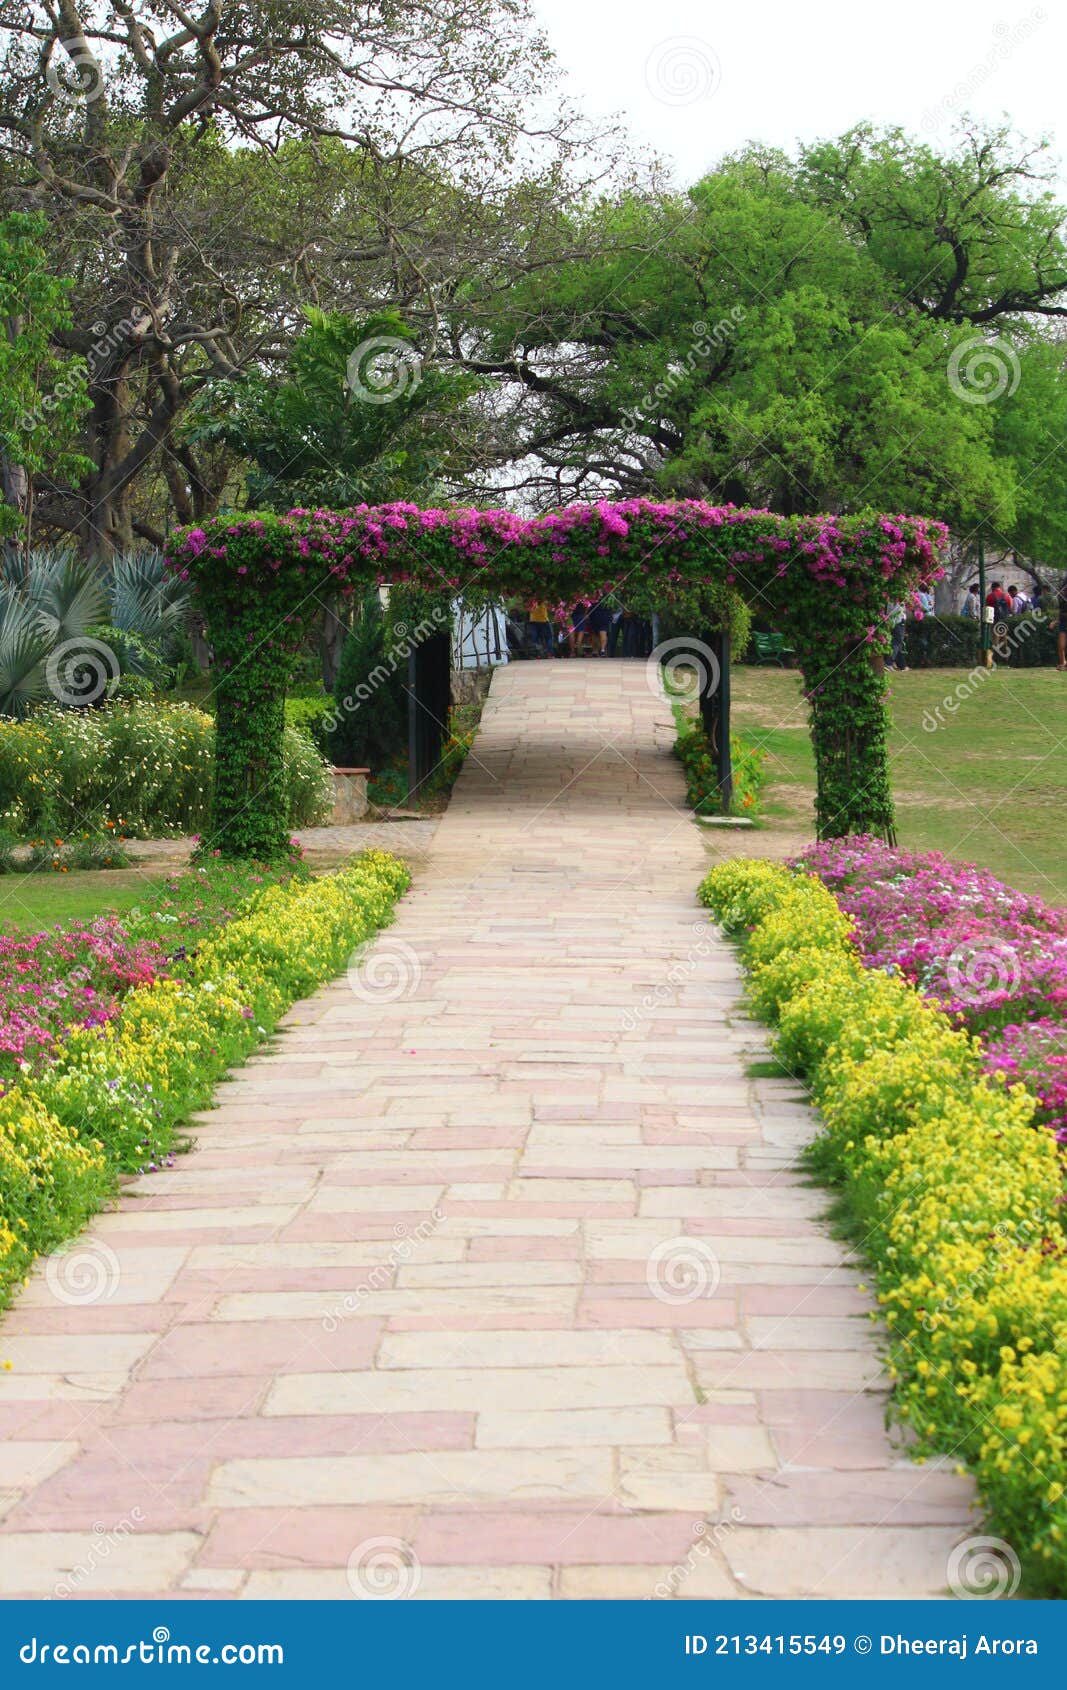 Colorful Spring Flowers in Lodi Gardens Stock Image - Image of ...